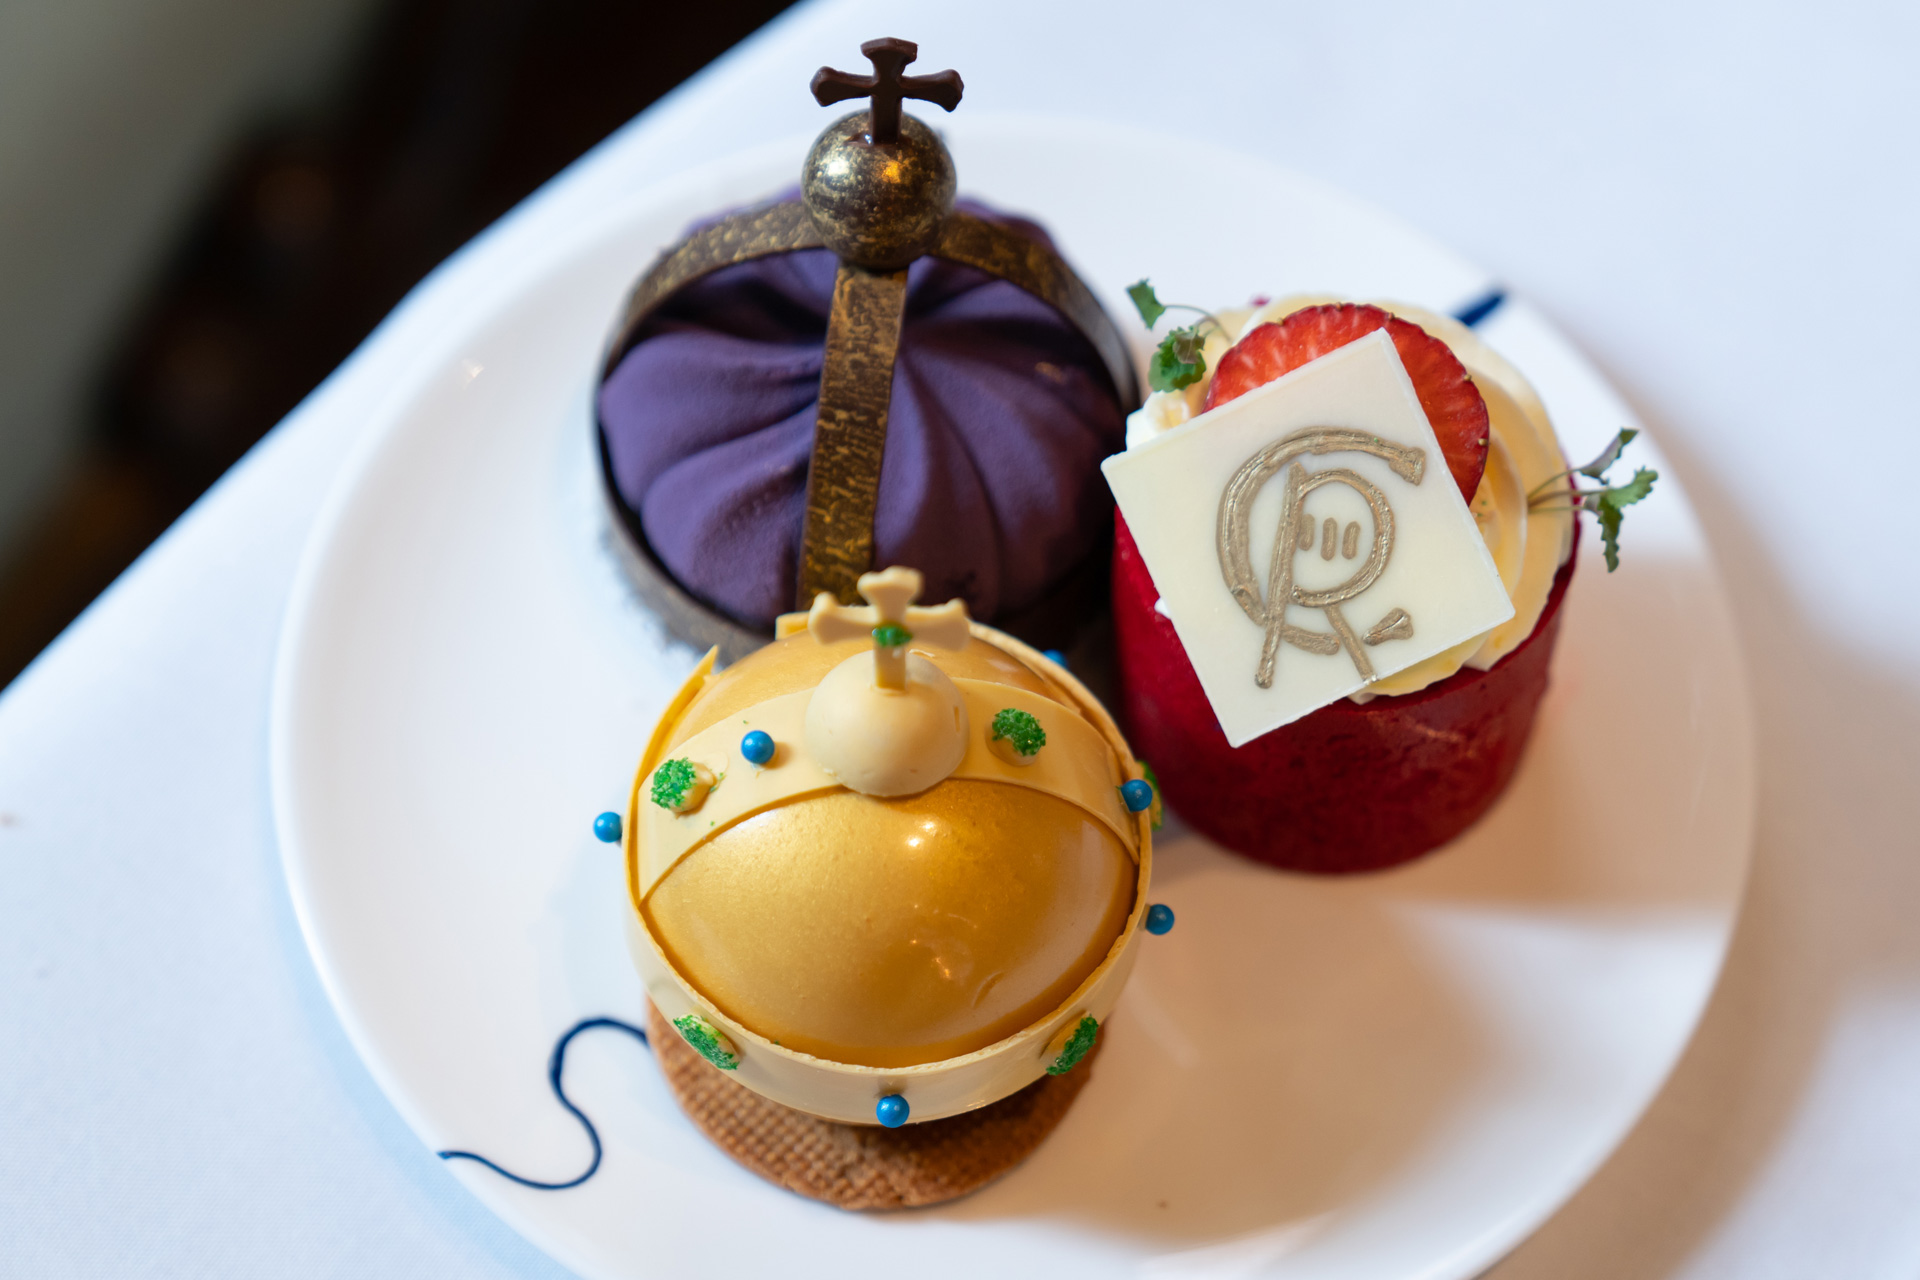 Cakes from the coronation afternoon tea at Great Scotland Yard Hotel